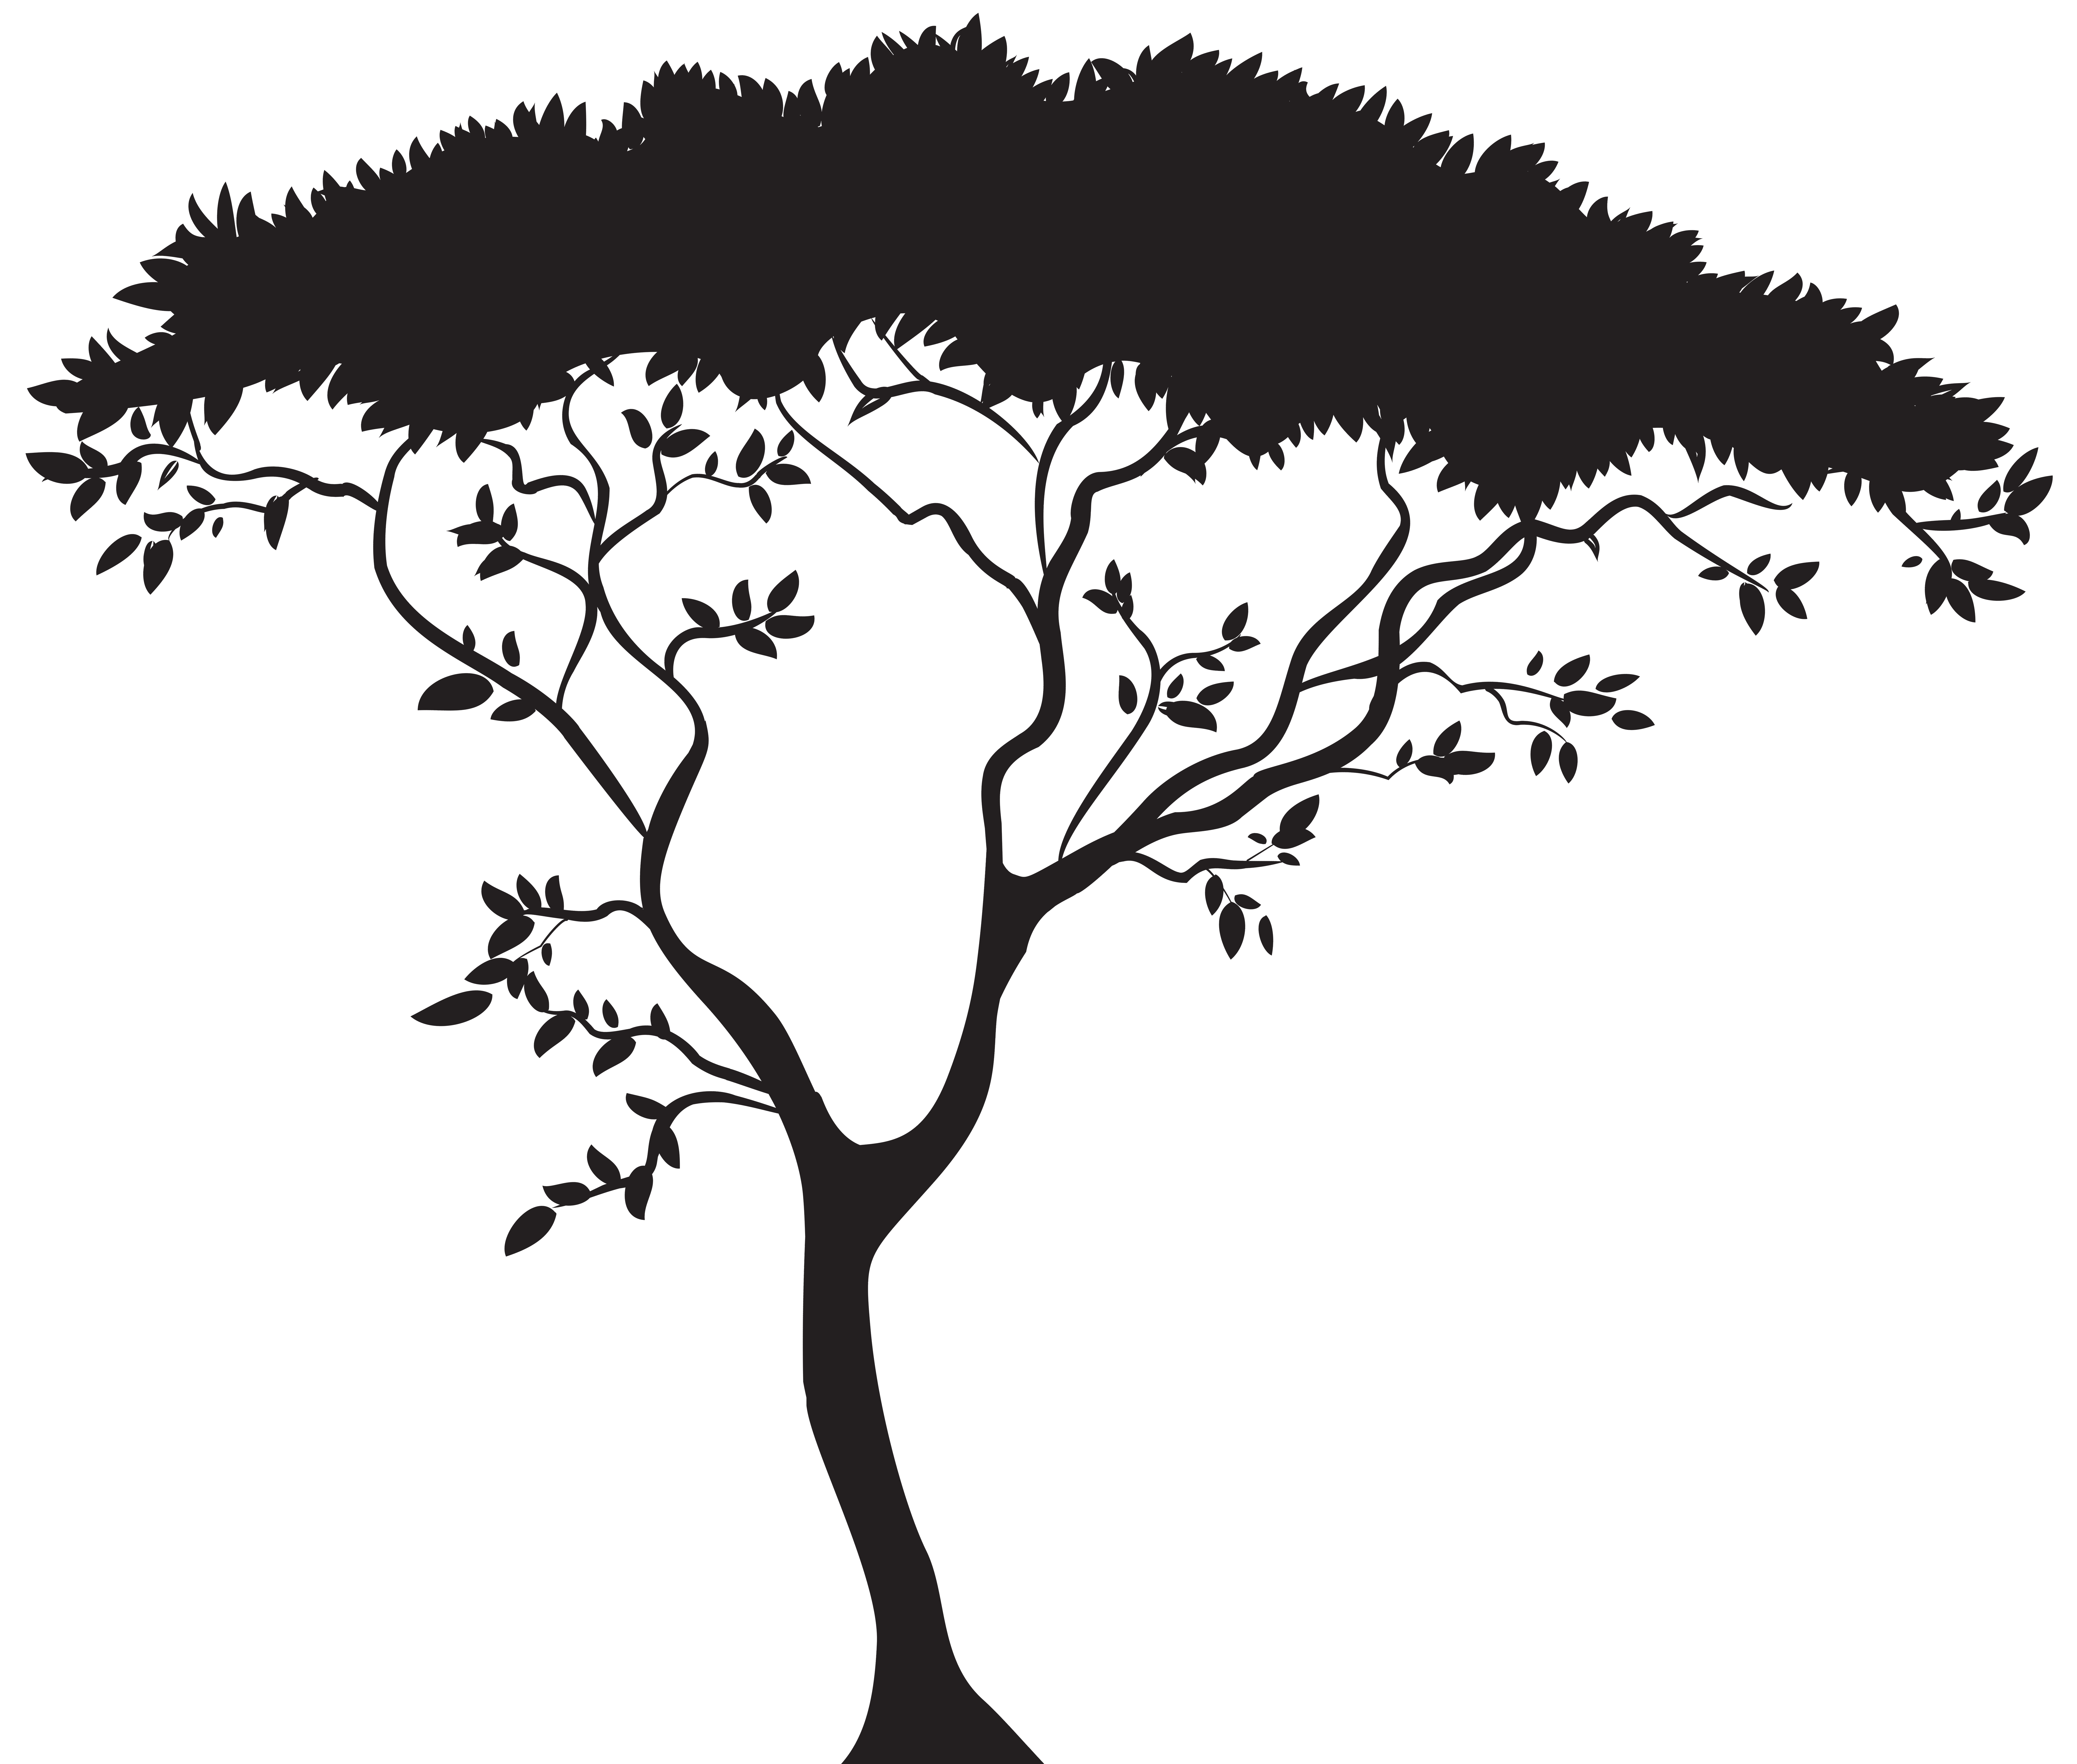 African Tree Silhouette PNG Clip Art | Gallery Yopriceville - High ...